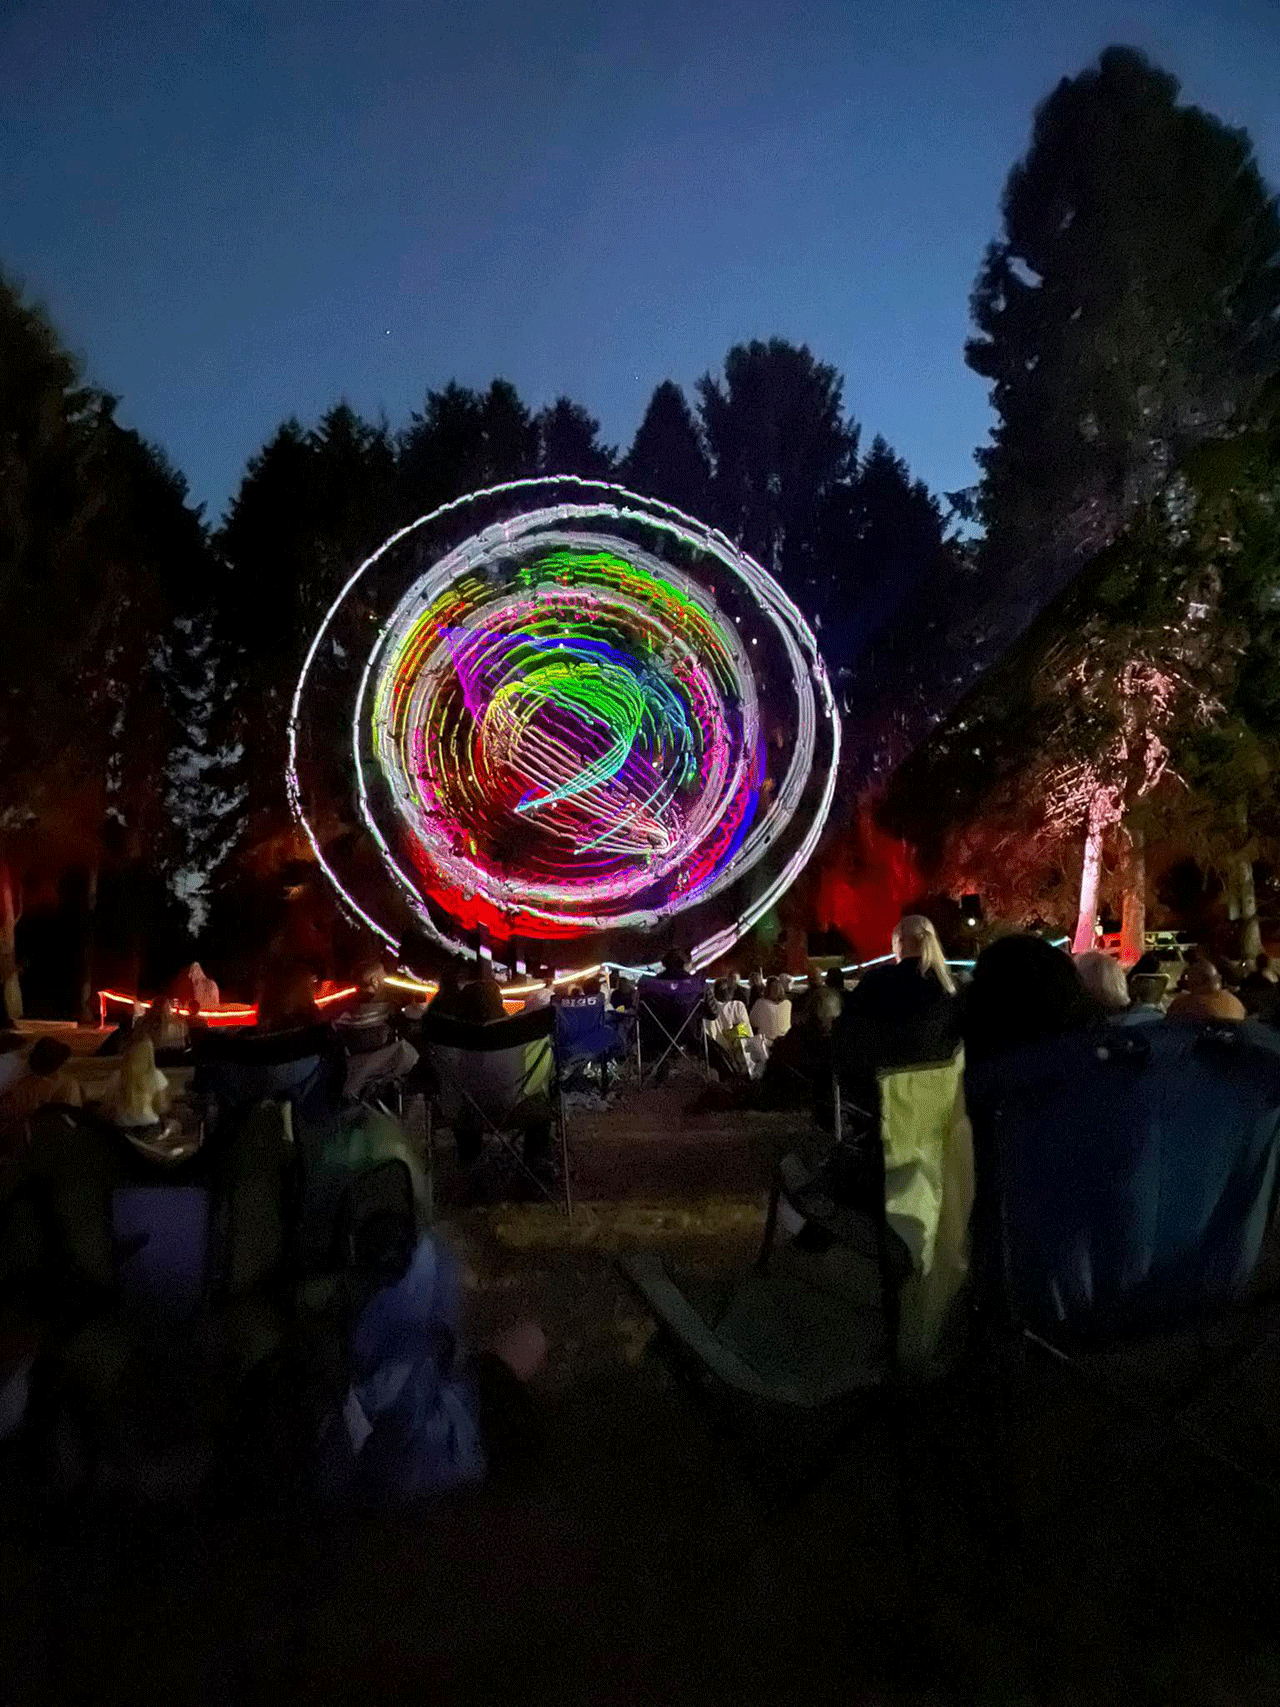 (Laura Jean Walls-Fisher Photo)
Hundreds attended “Liquid Light” on July 4.